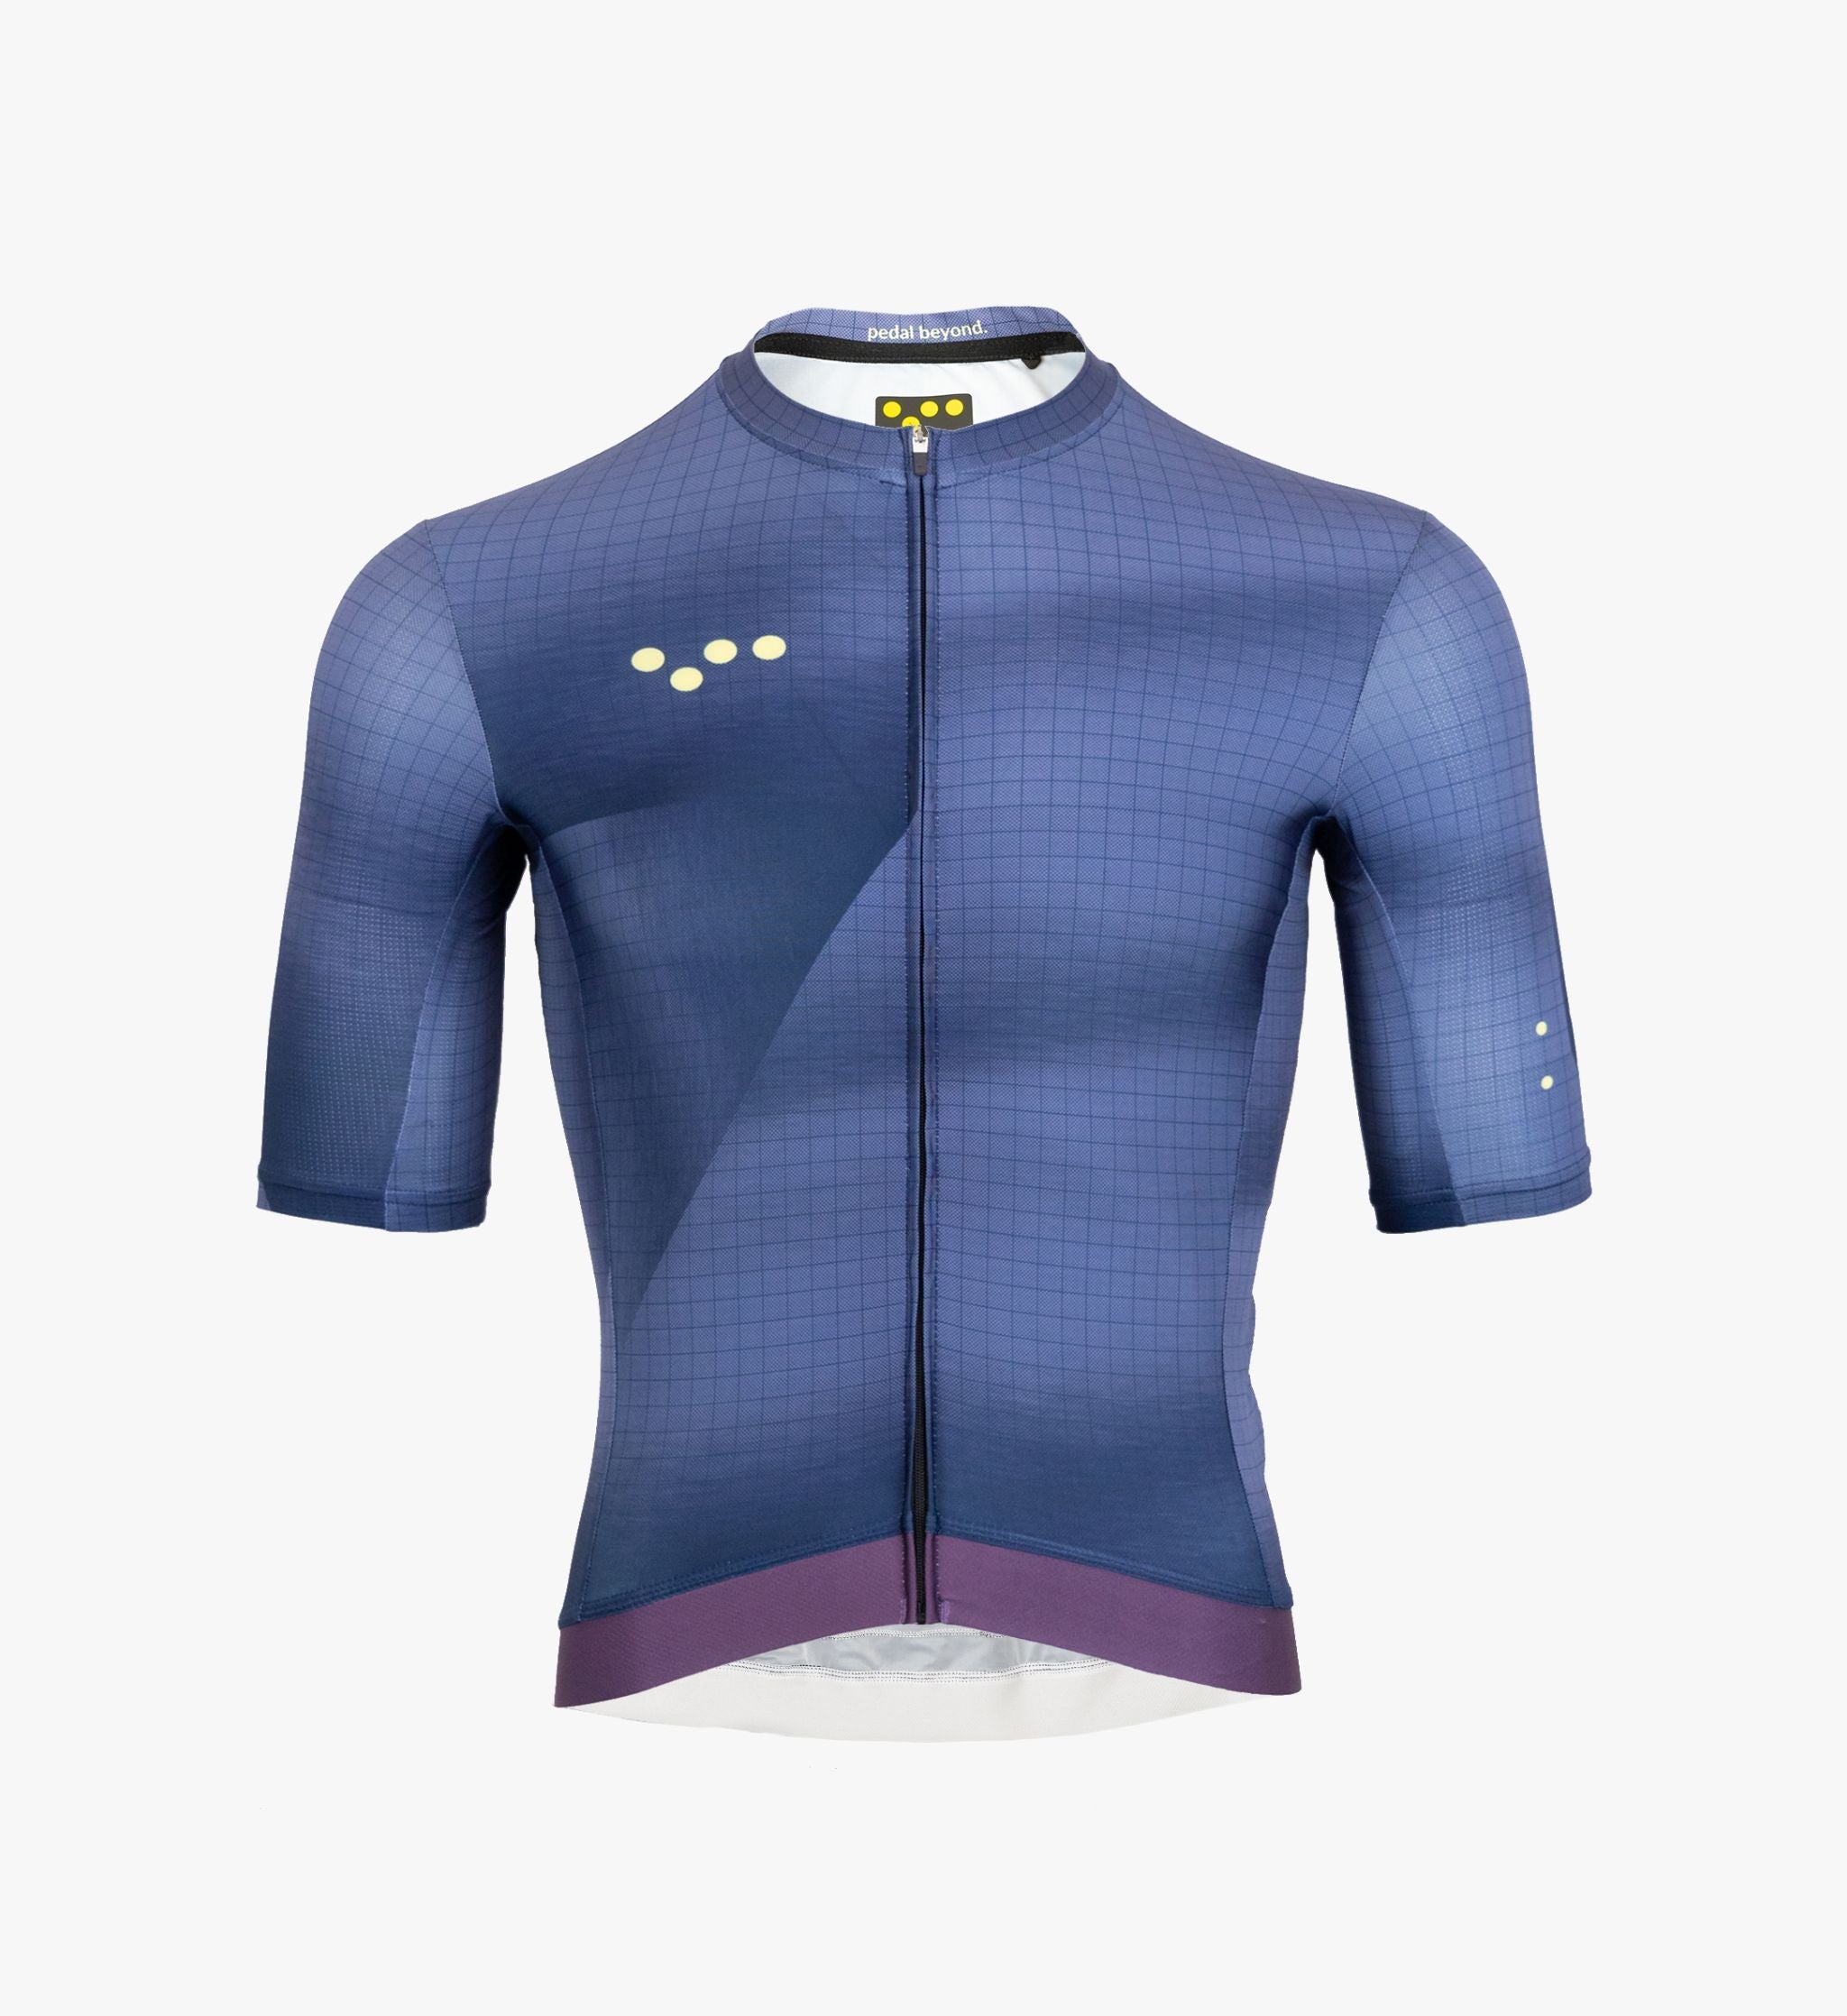 Kinetic Classic Jersey